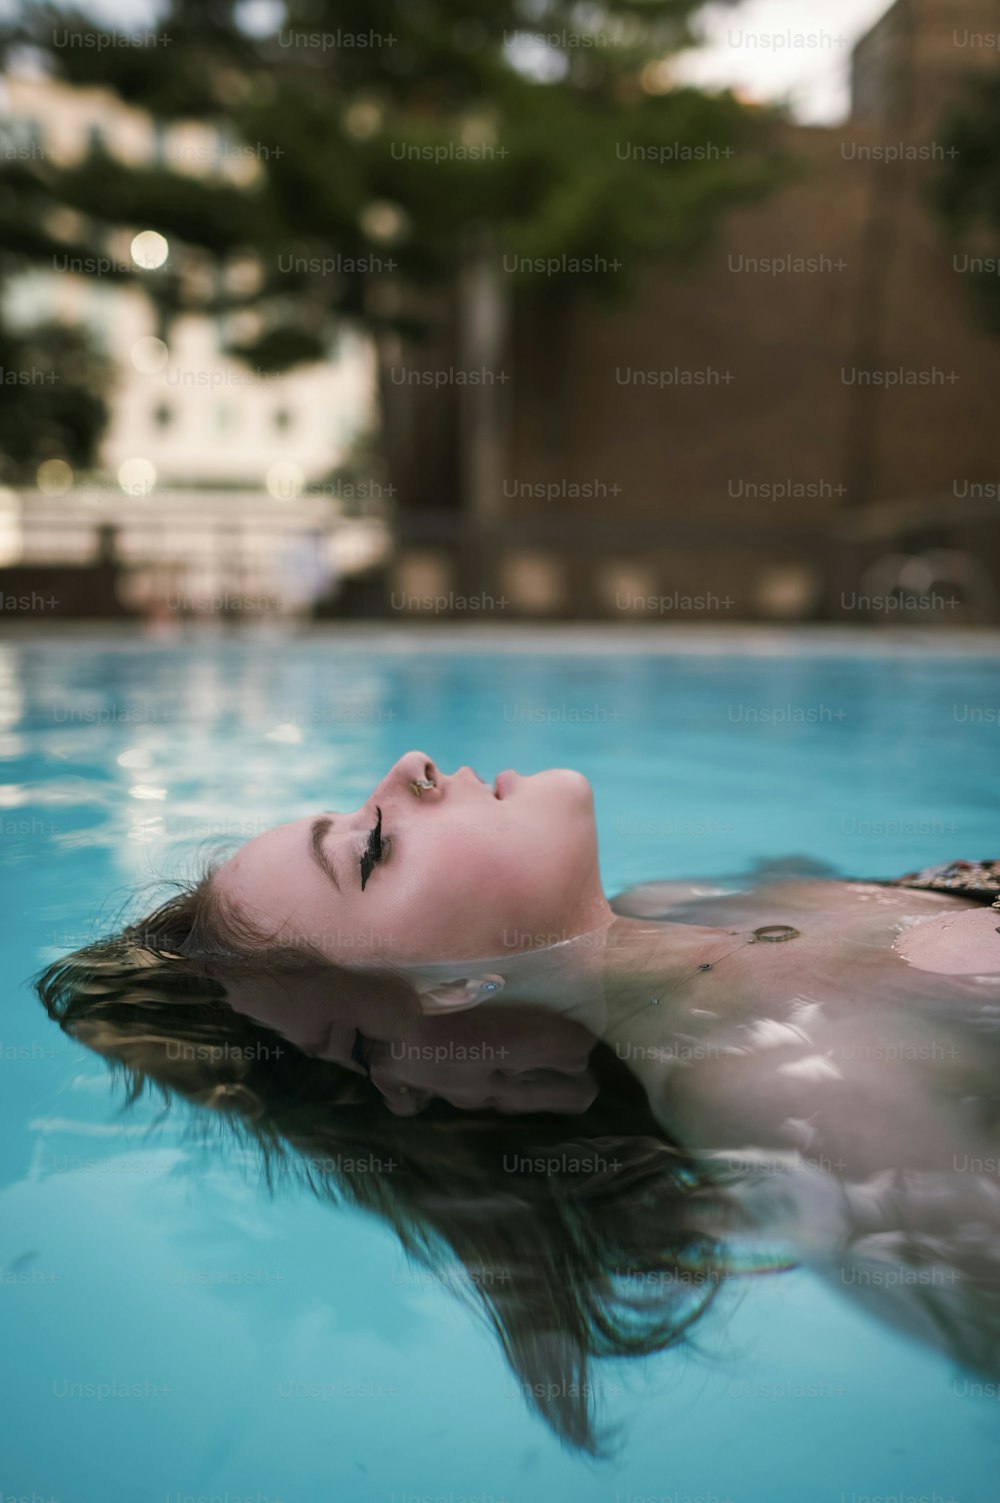 a woman floating in a pool of water